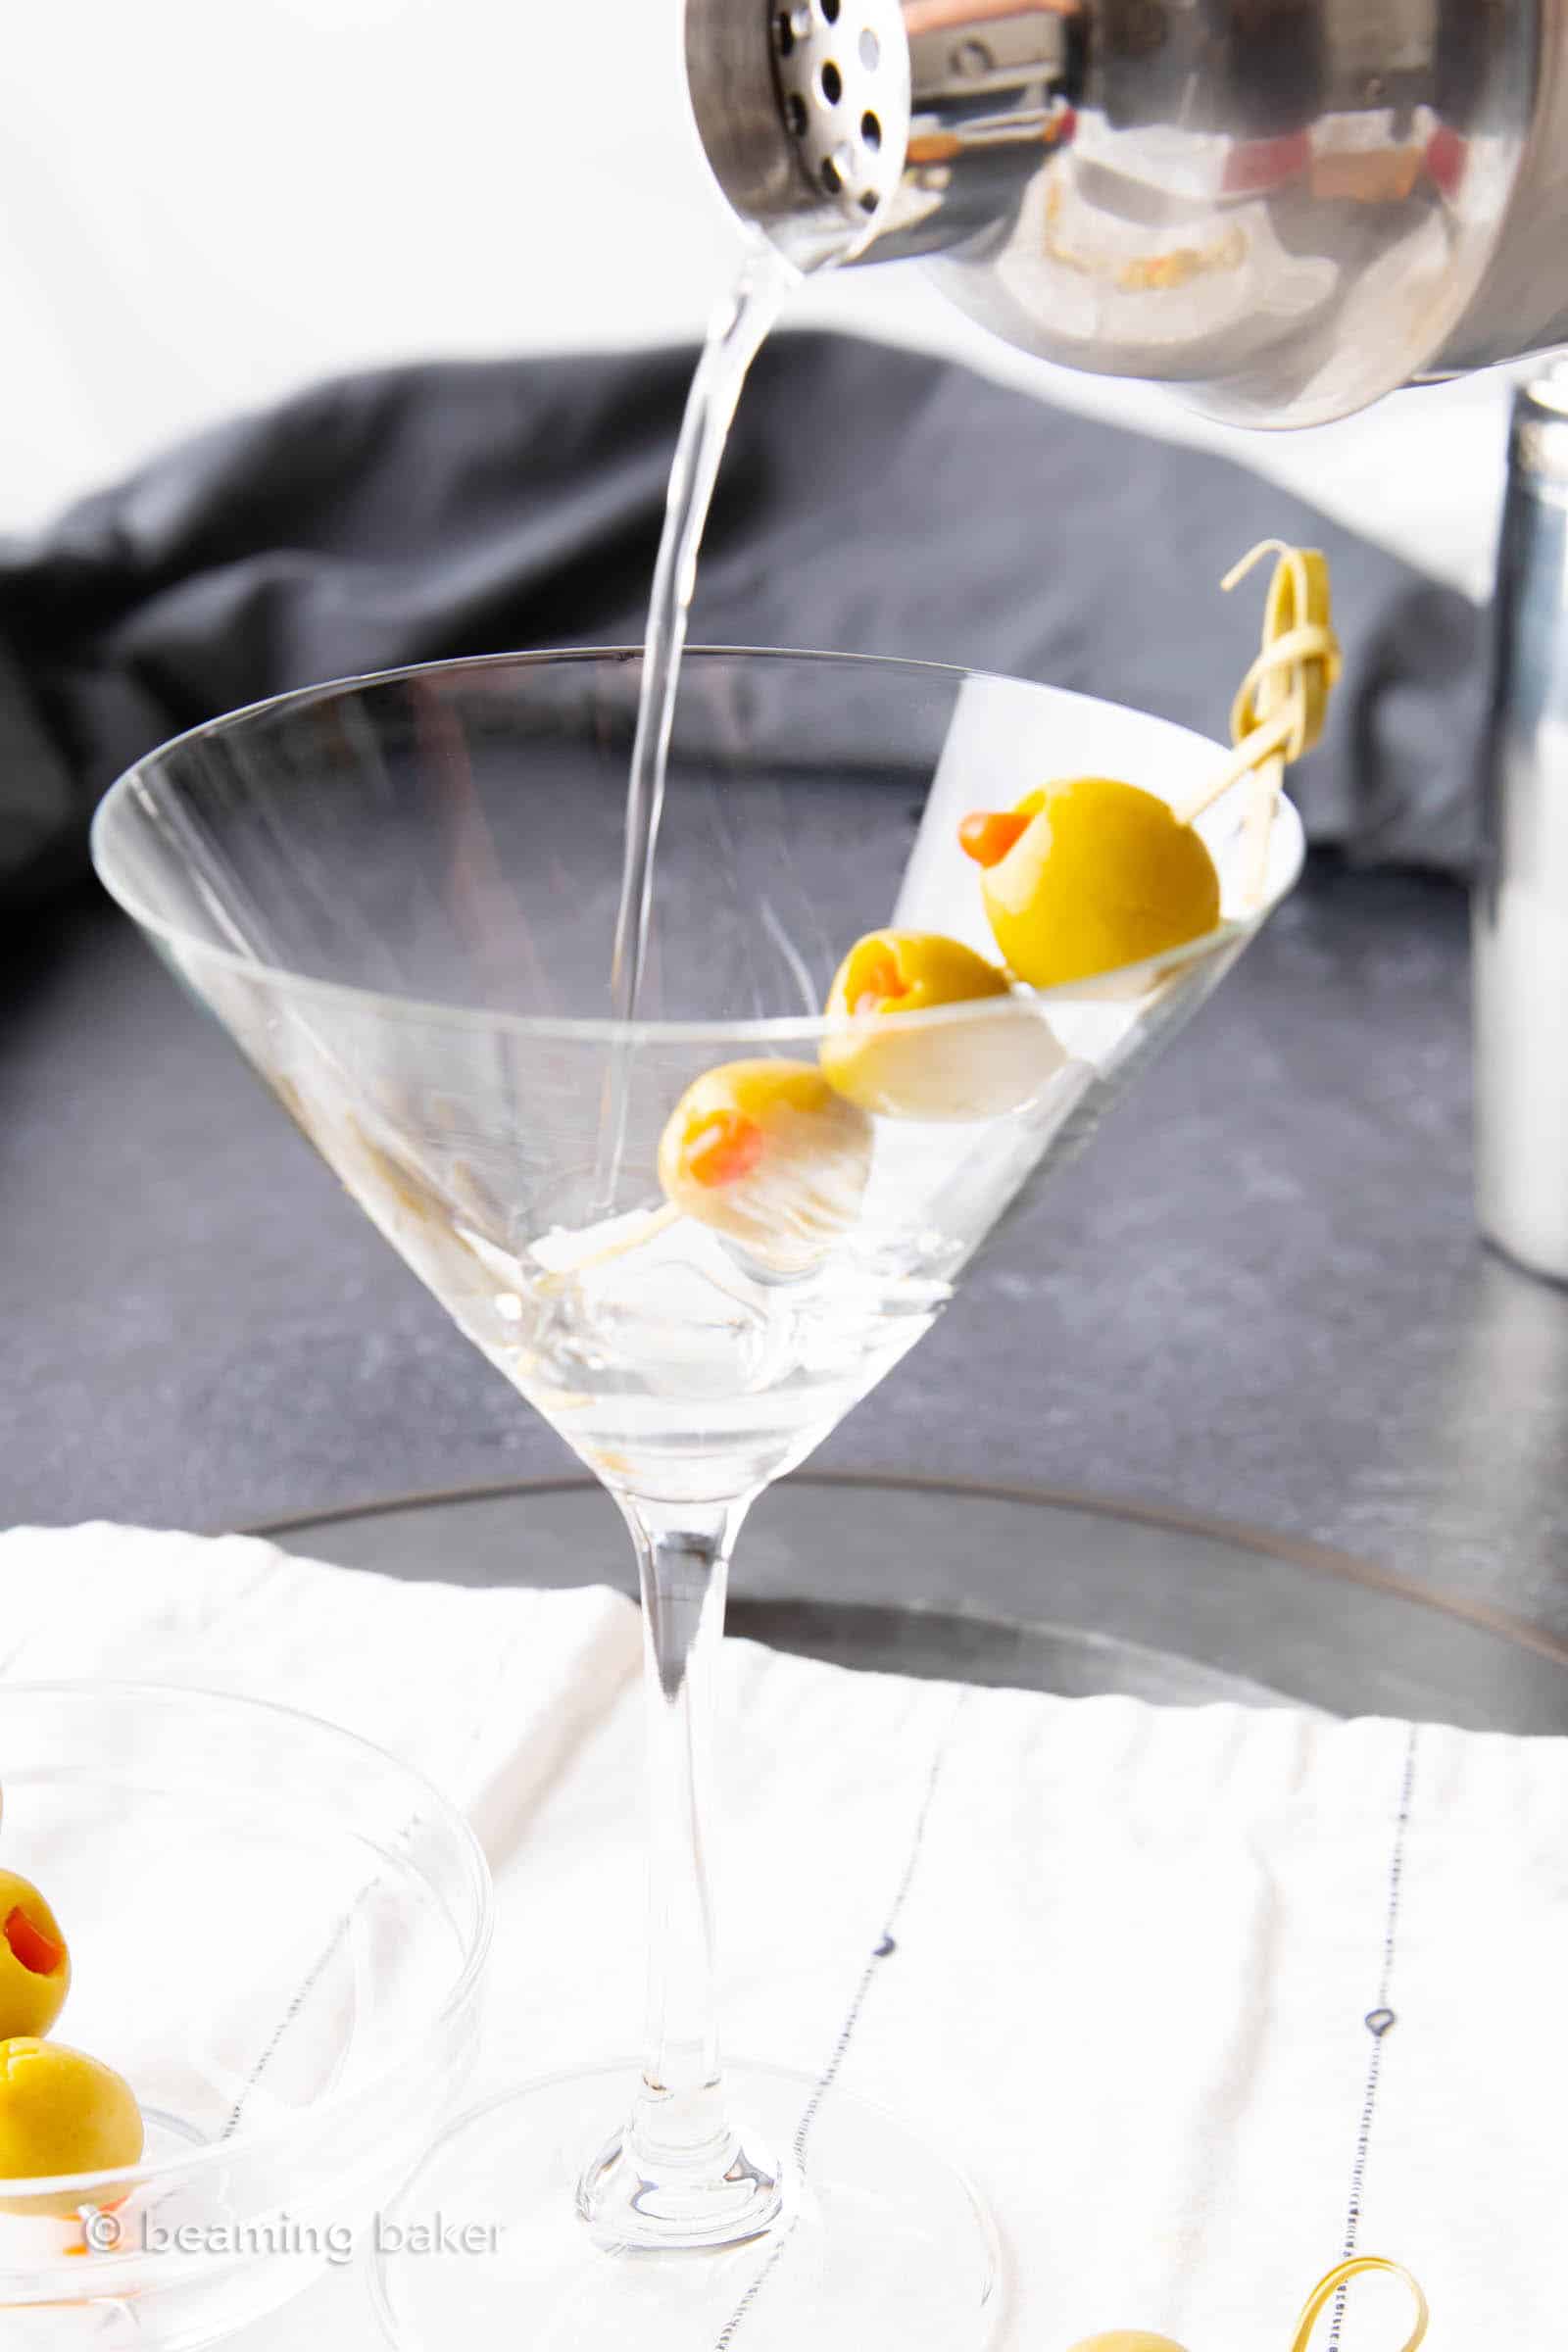 Closeup shot of pouring dirty martini liquid into a chilled martini glass over olive skewer